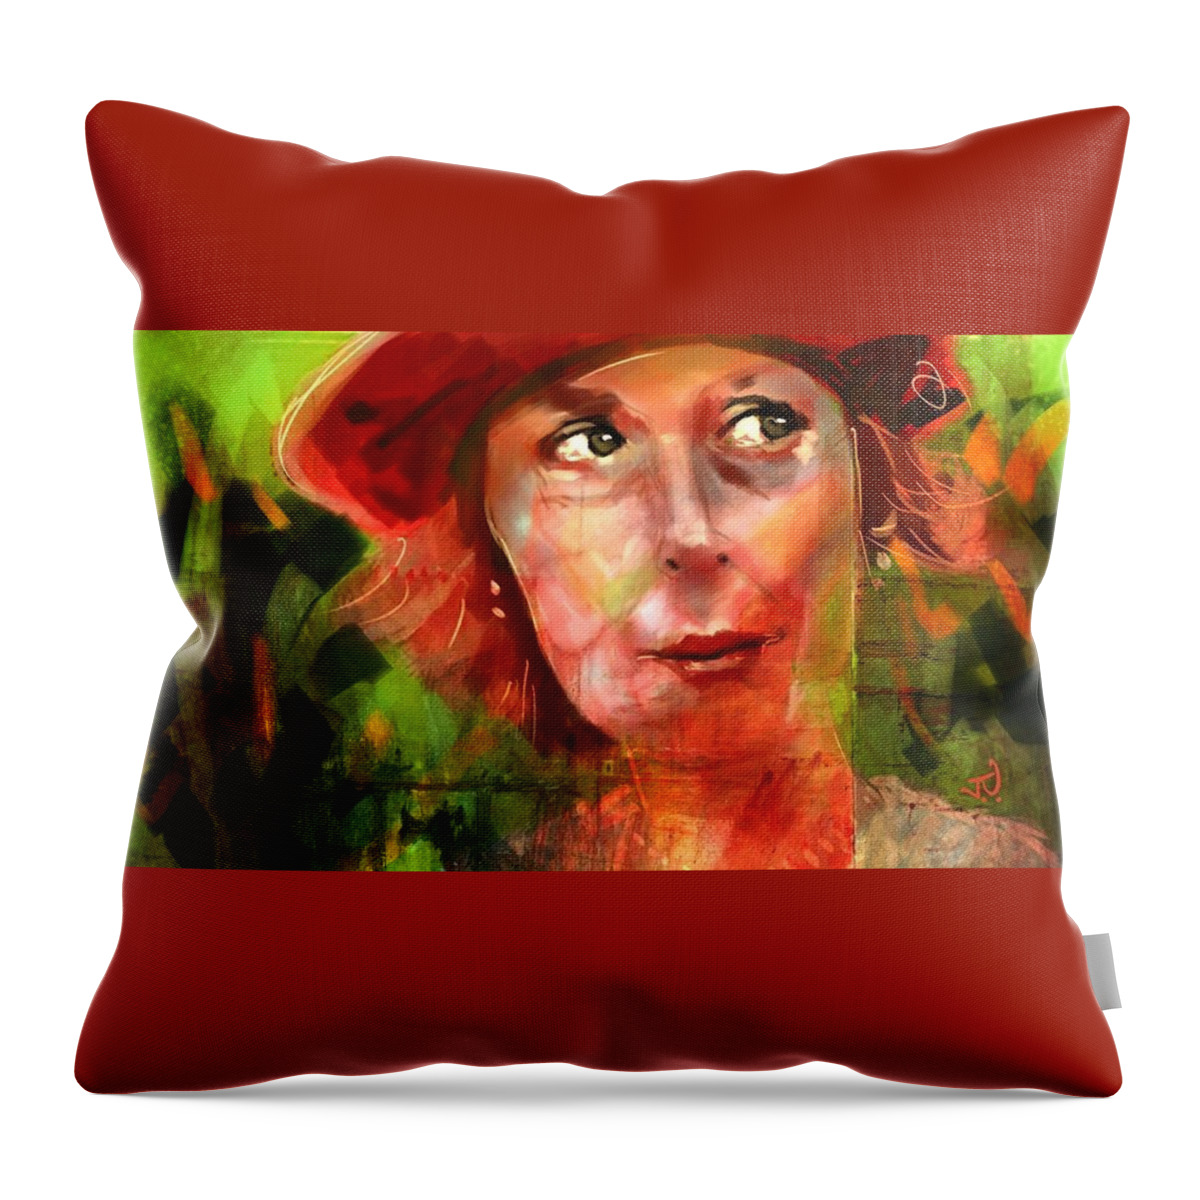 Portrait Throw Pillow featuring the painting The Happy Gardener by Jim Vance